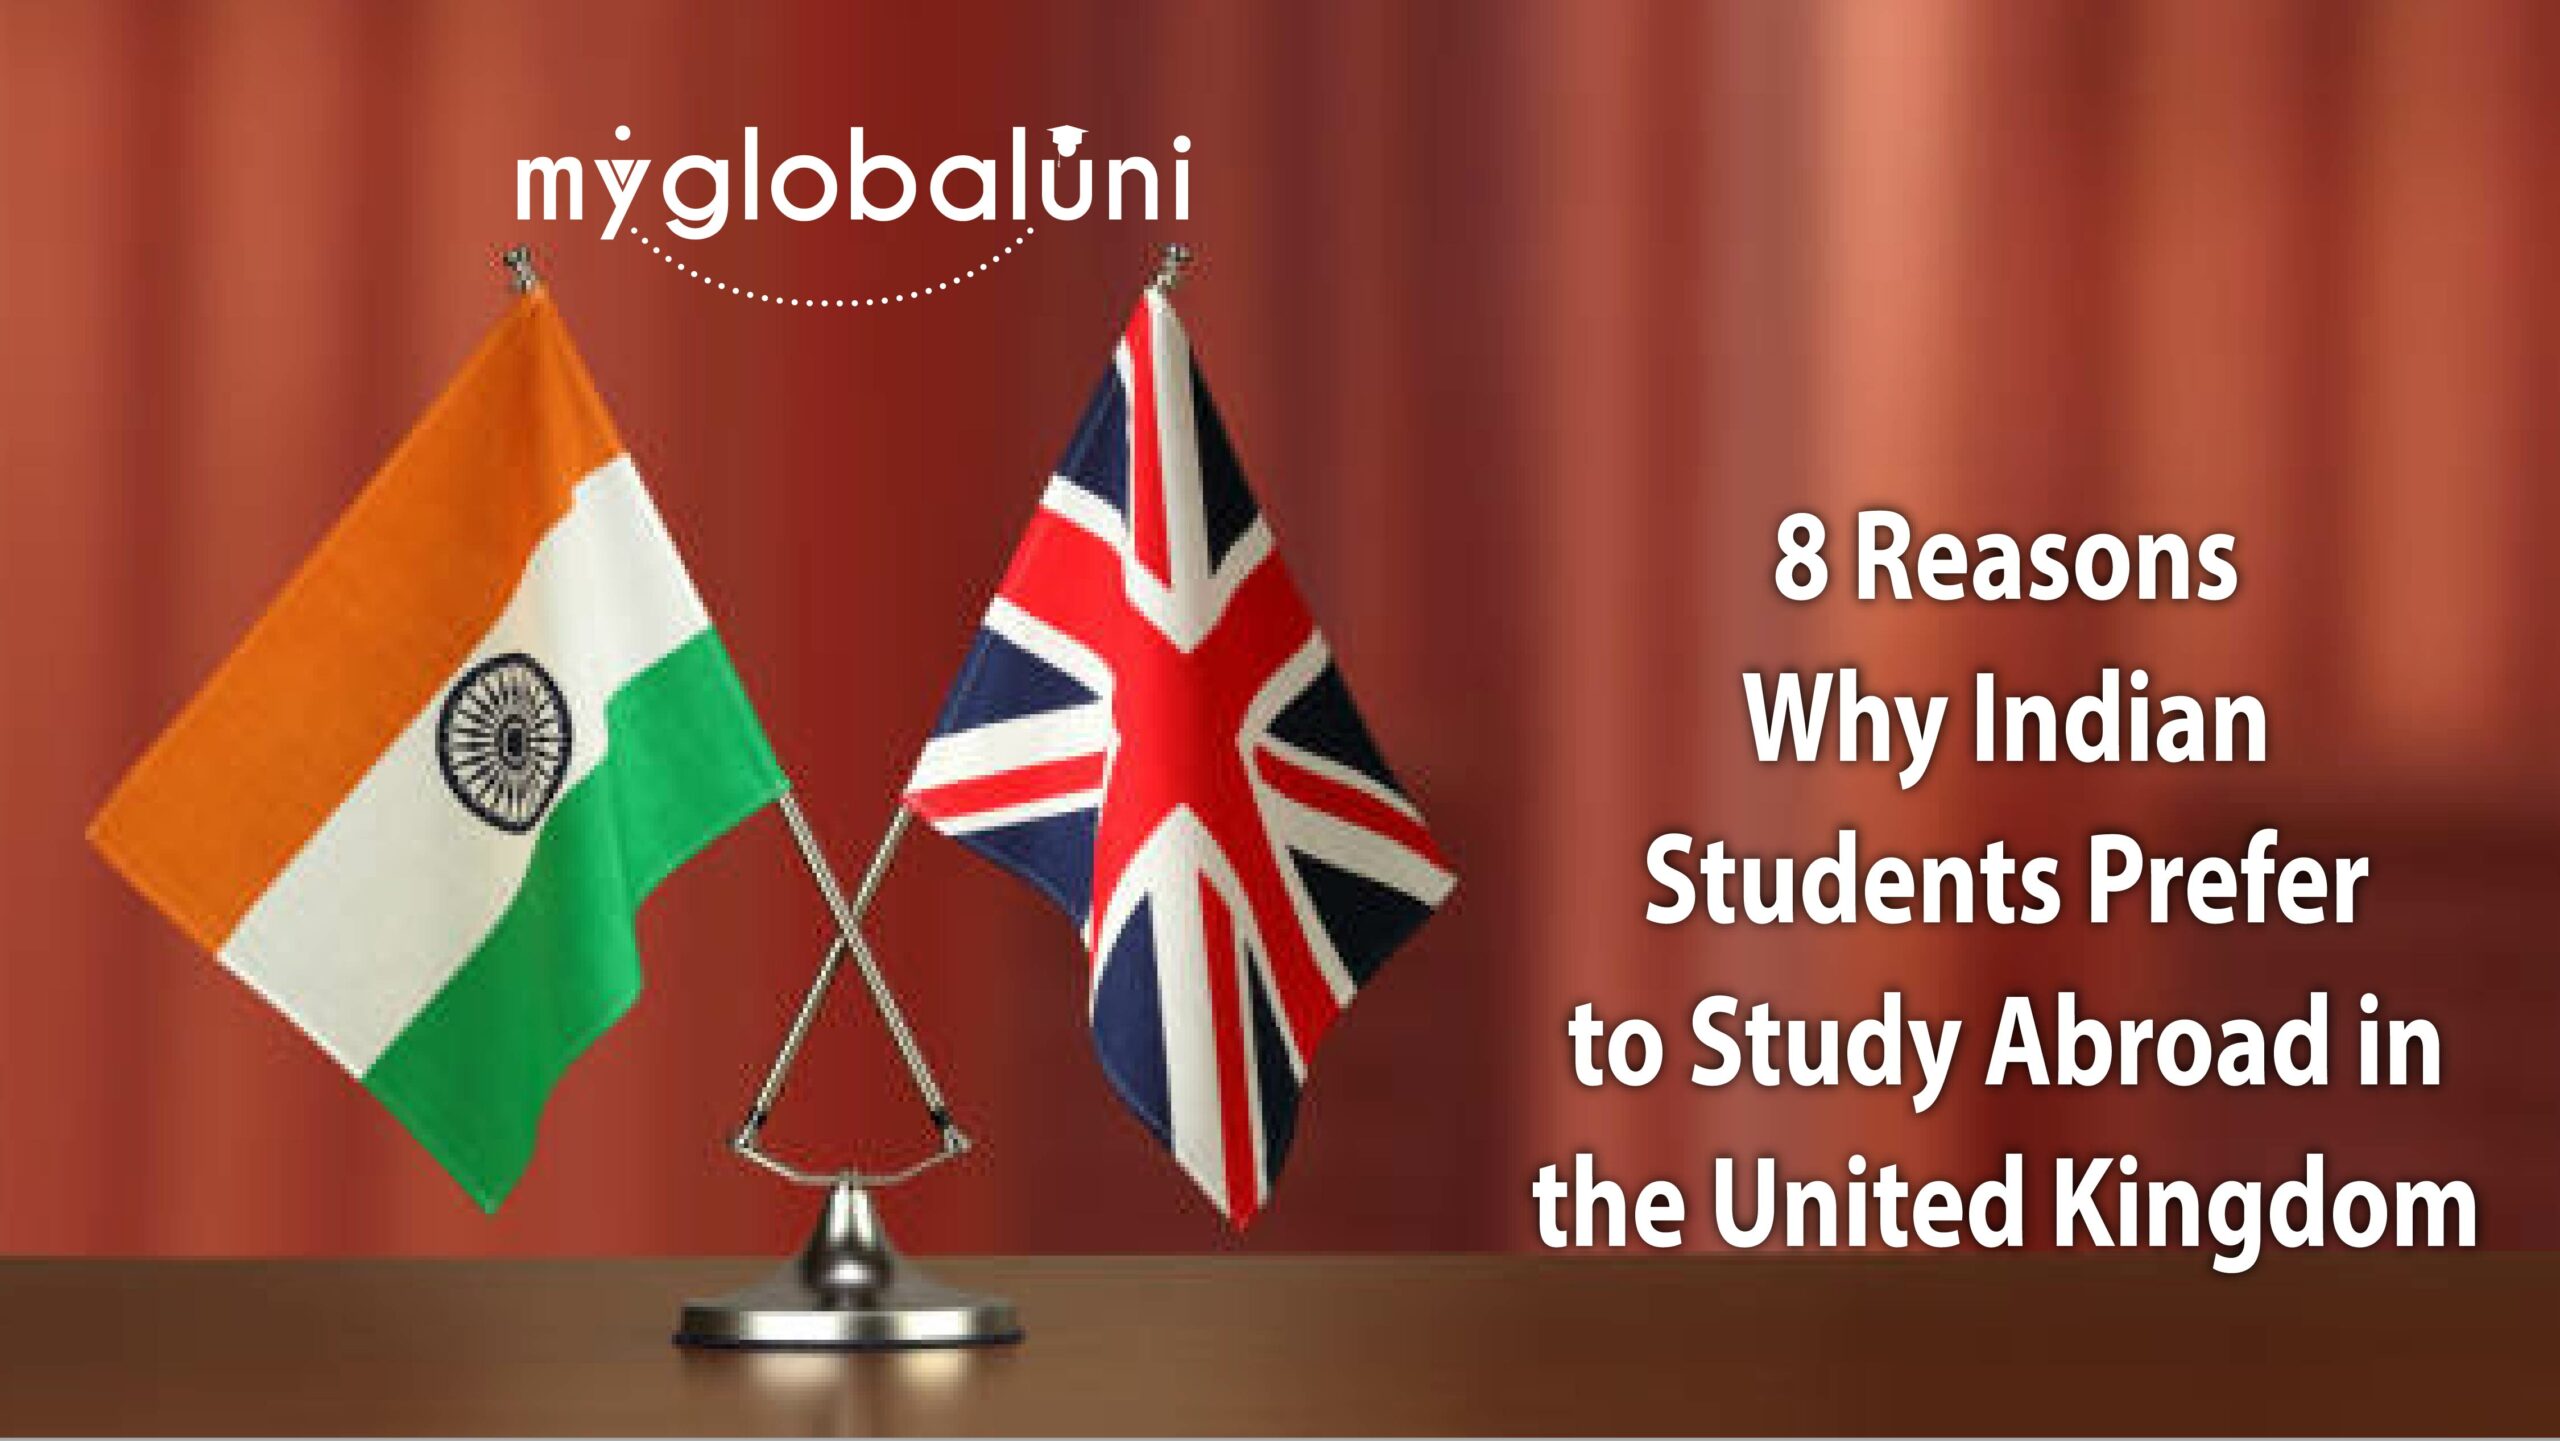 Eight Reasons Why Indian Students Prefer to Study Abroad in the United Kingdom